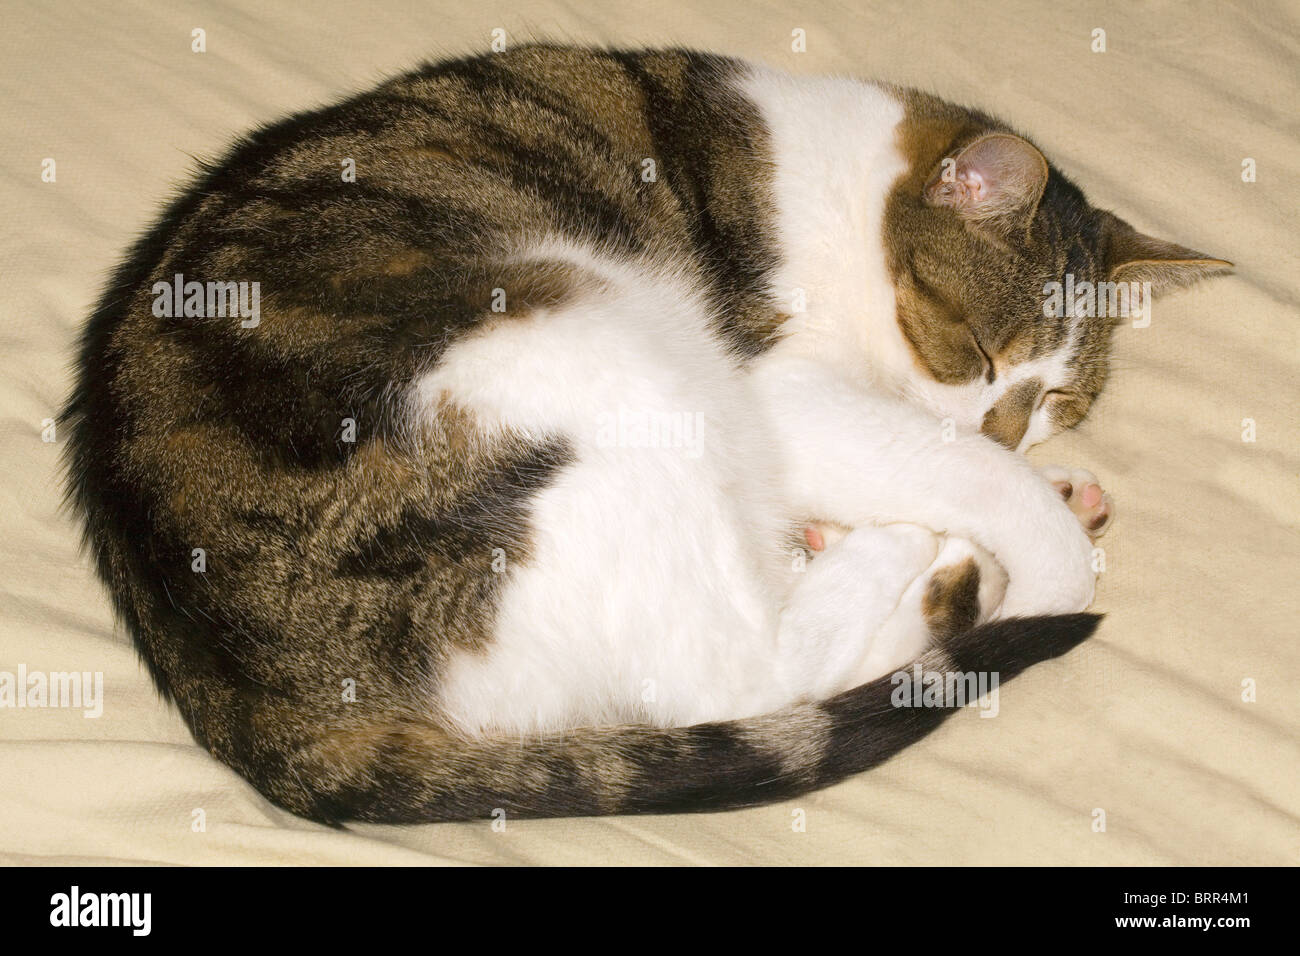 Cat sleeping curled up Stock Photo